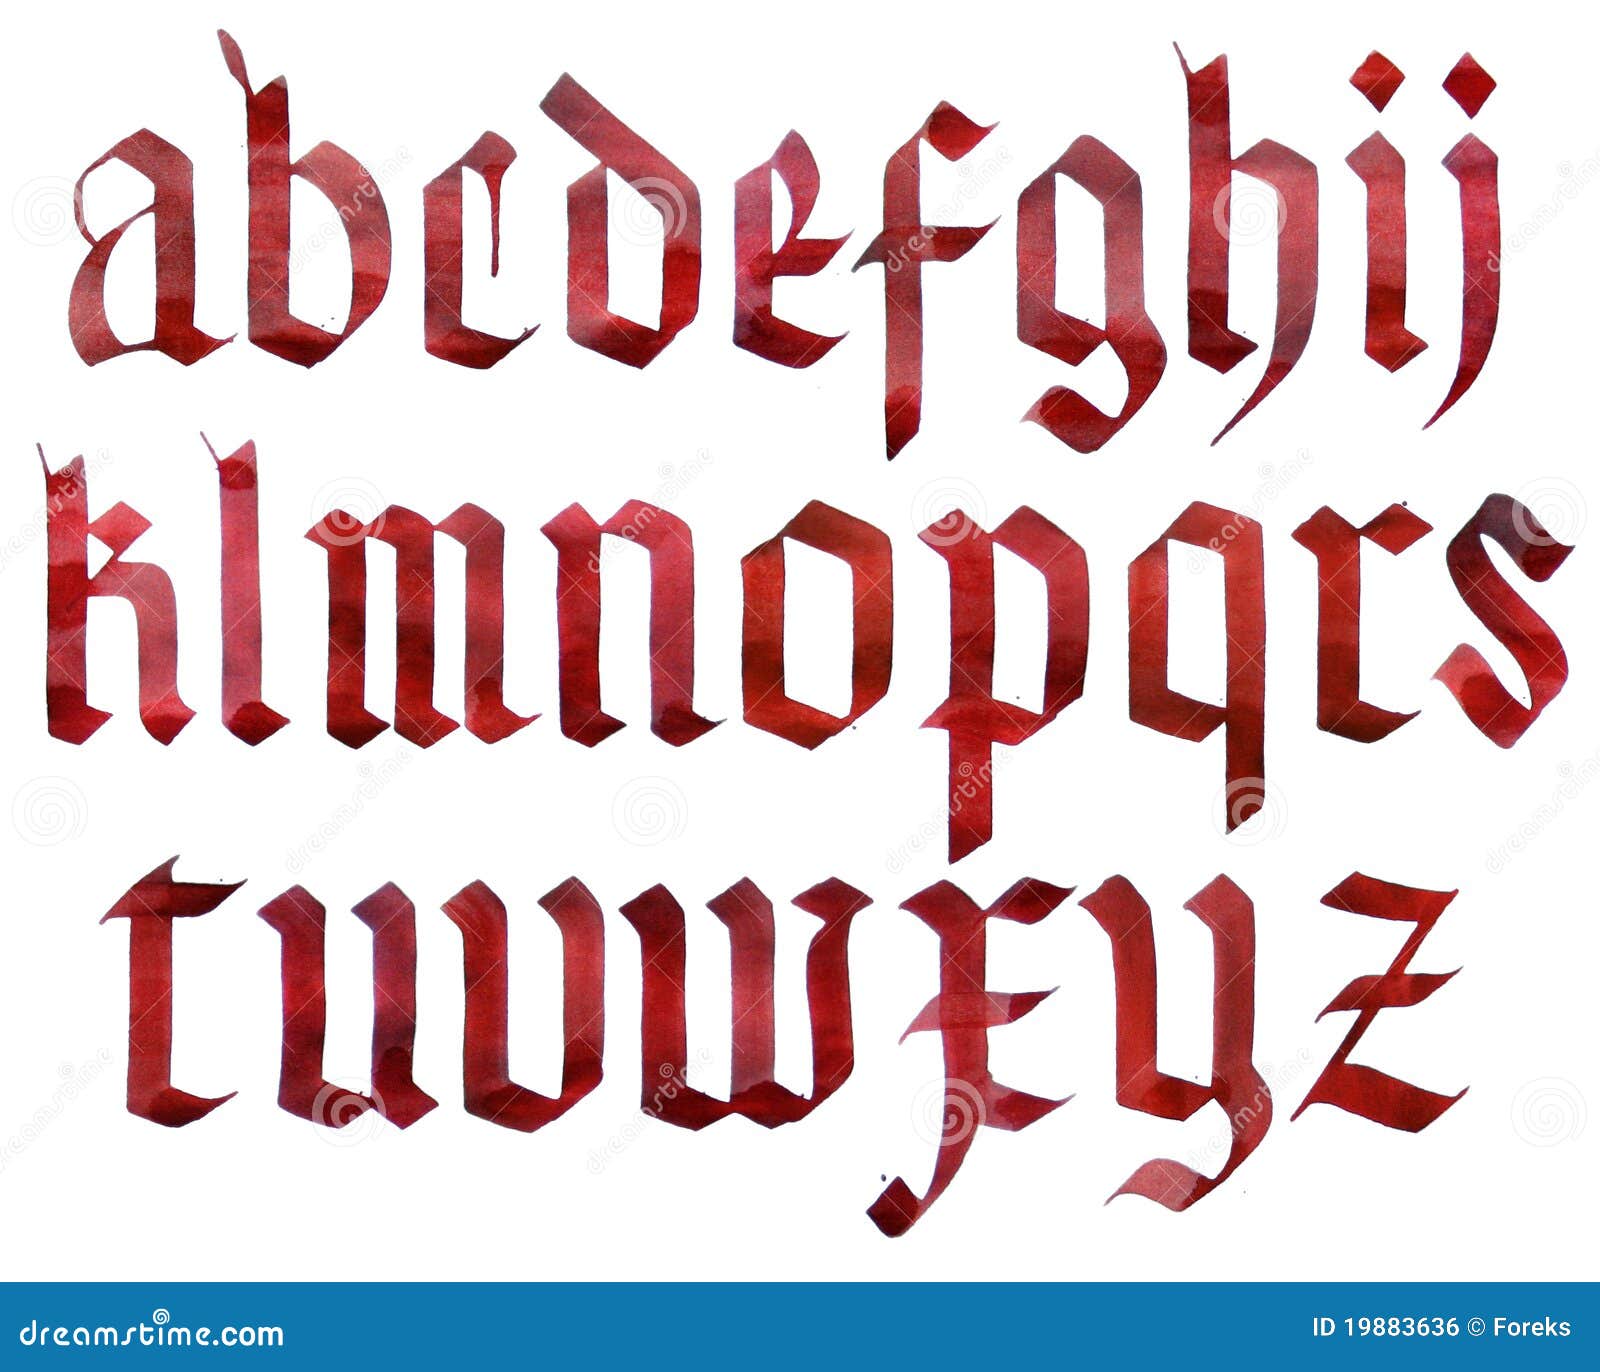 gothic calligraphy letters a z